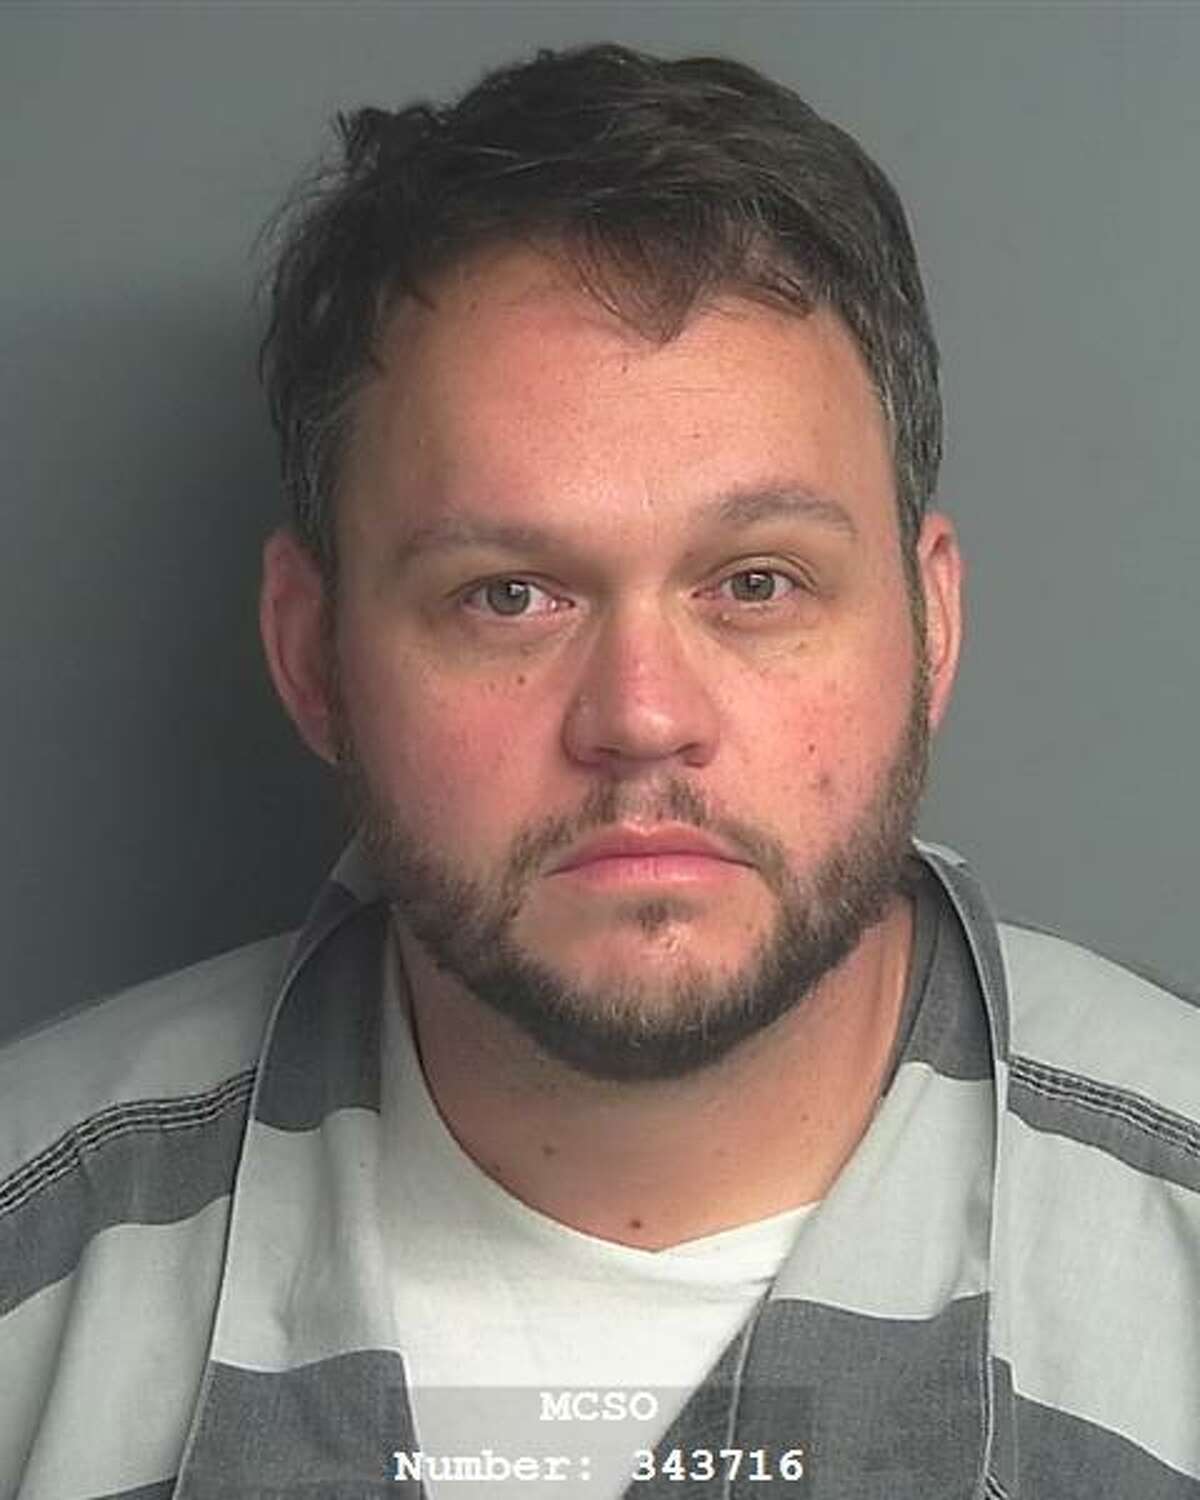 Graham James Butler, 38, of Austin, was convicted of promotion of child pornography, a second-degree felony.